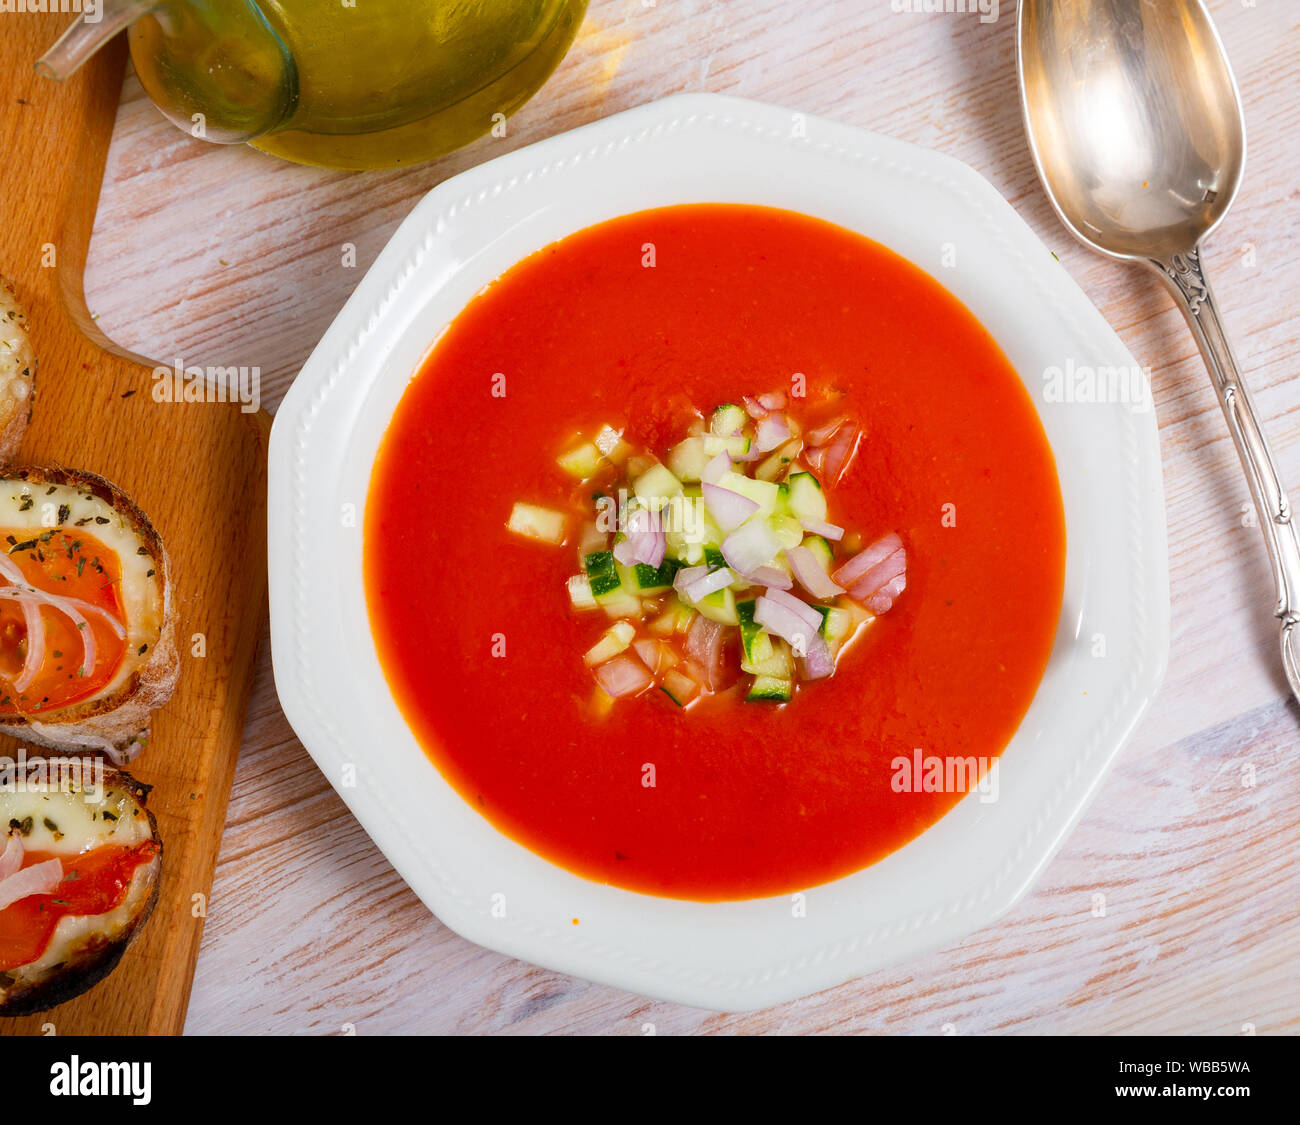 National Spanish Tomato Soup Gazpacho Served With Canape Stock Photo Alamy